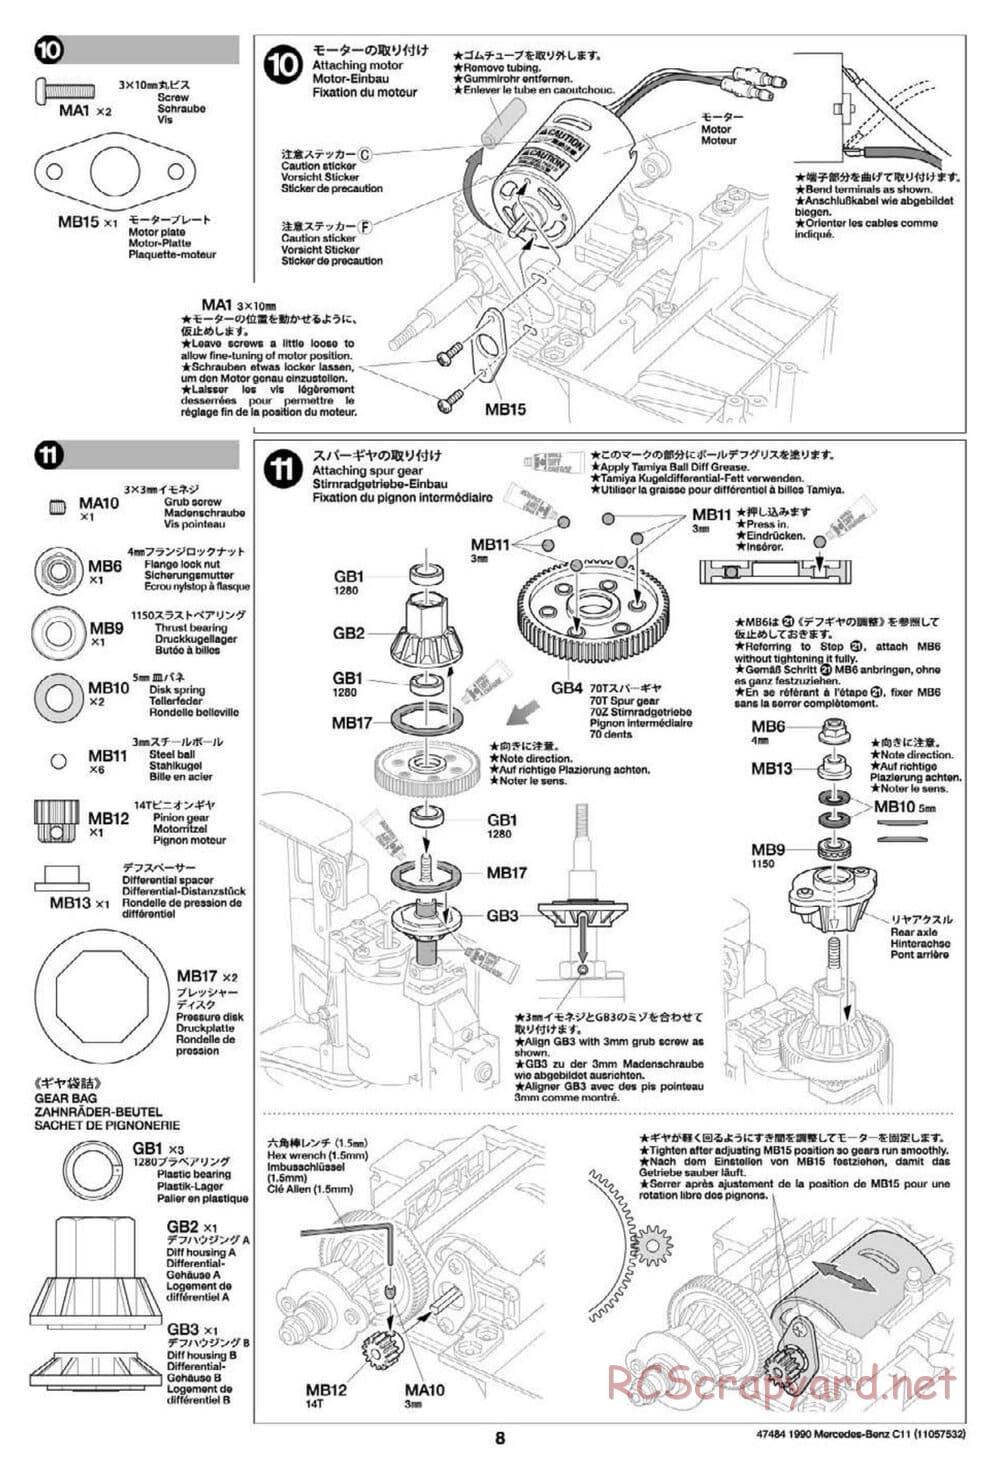 Tamiya - 1990 Mercedes-Benz C11 - Group-C Chassis - Manual - Page 8